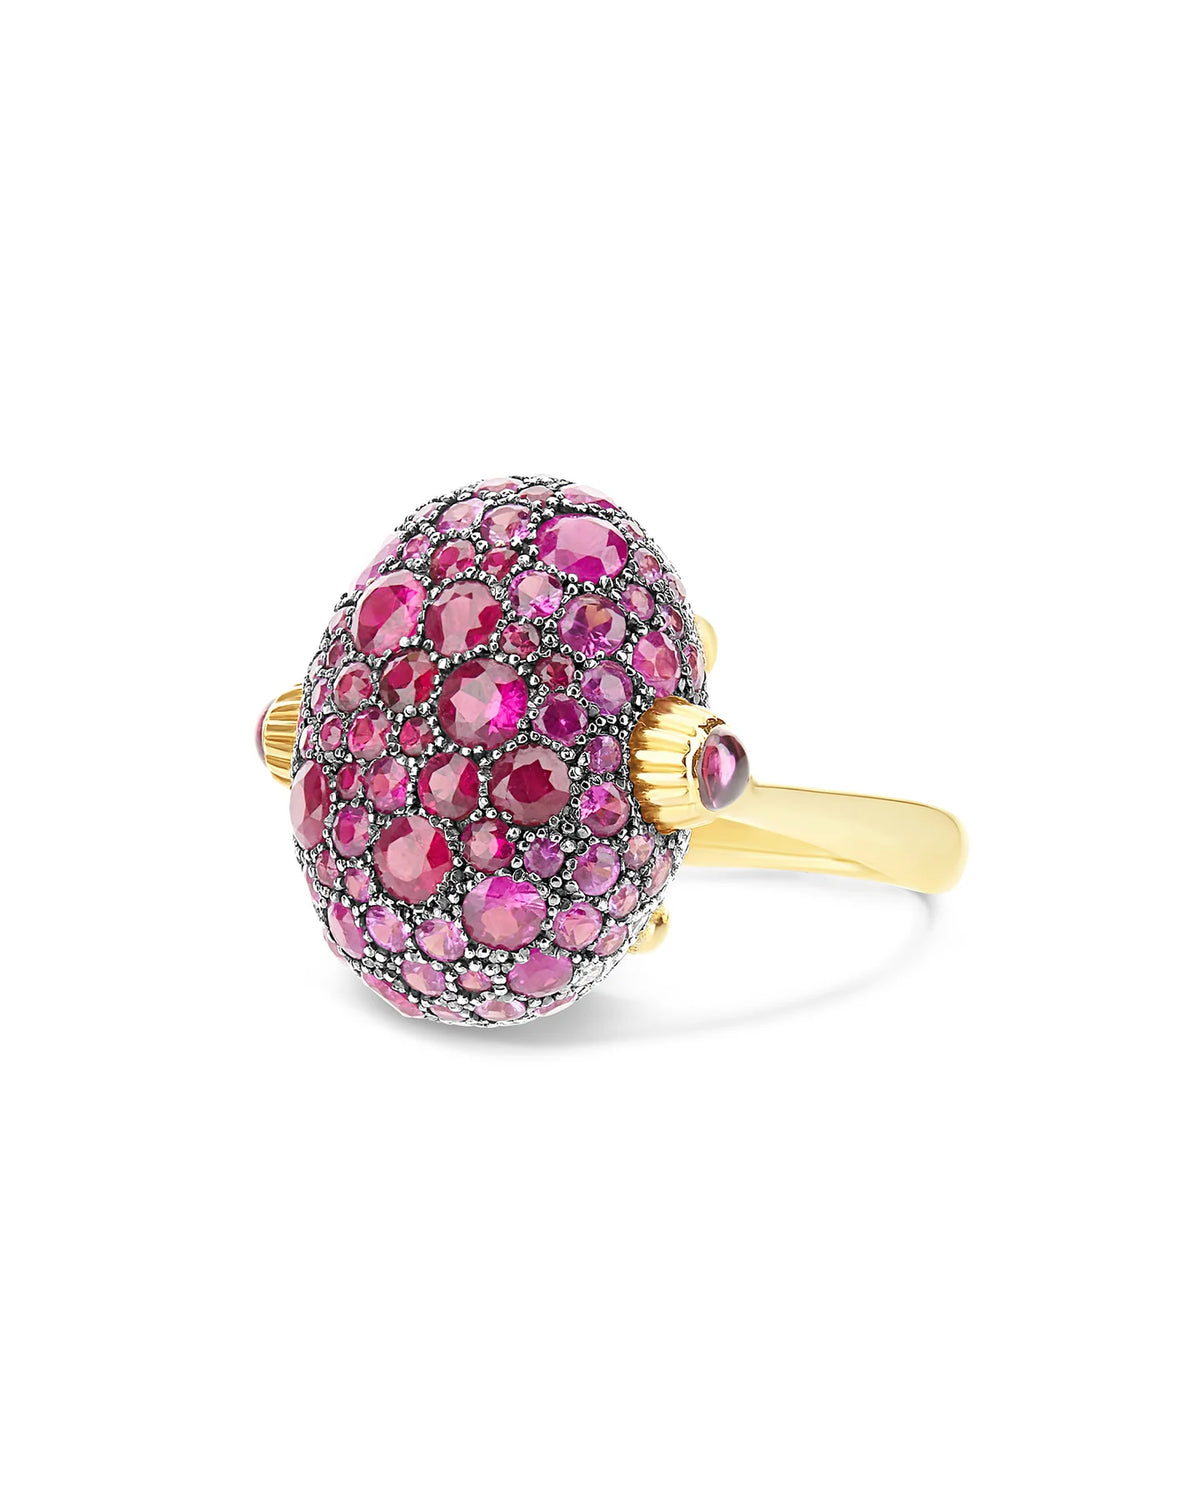 Nanis Reverse Gold, Pink Sapphires, Rubies, White Australian Opal and Diamonds Double Face Ring (Large) - Orsini Jewellers